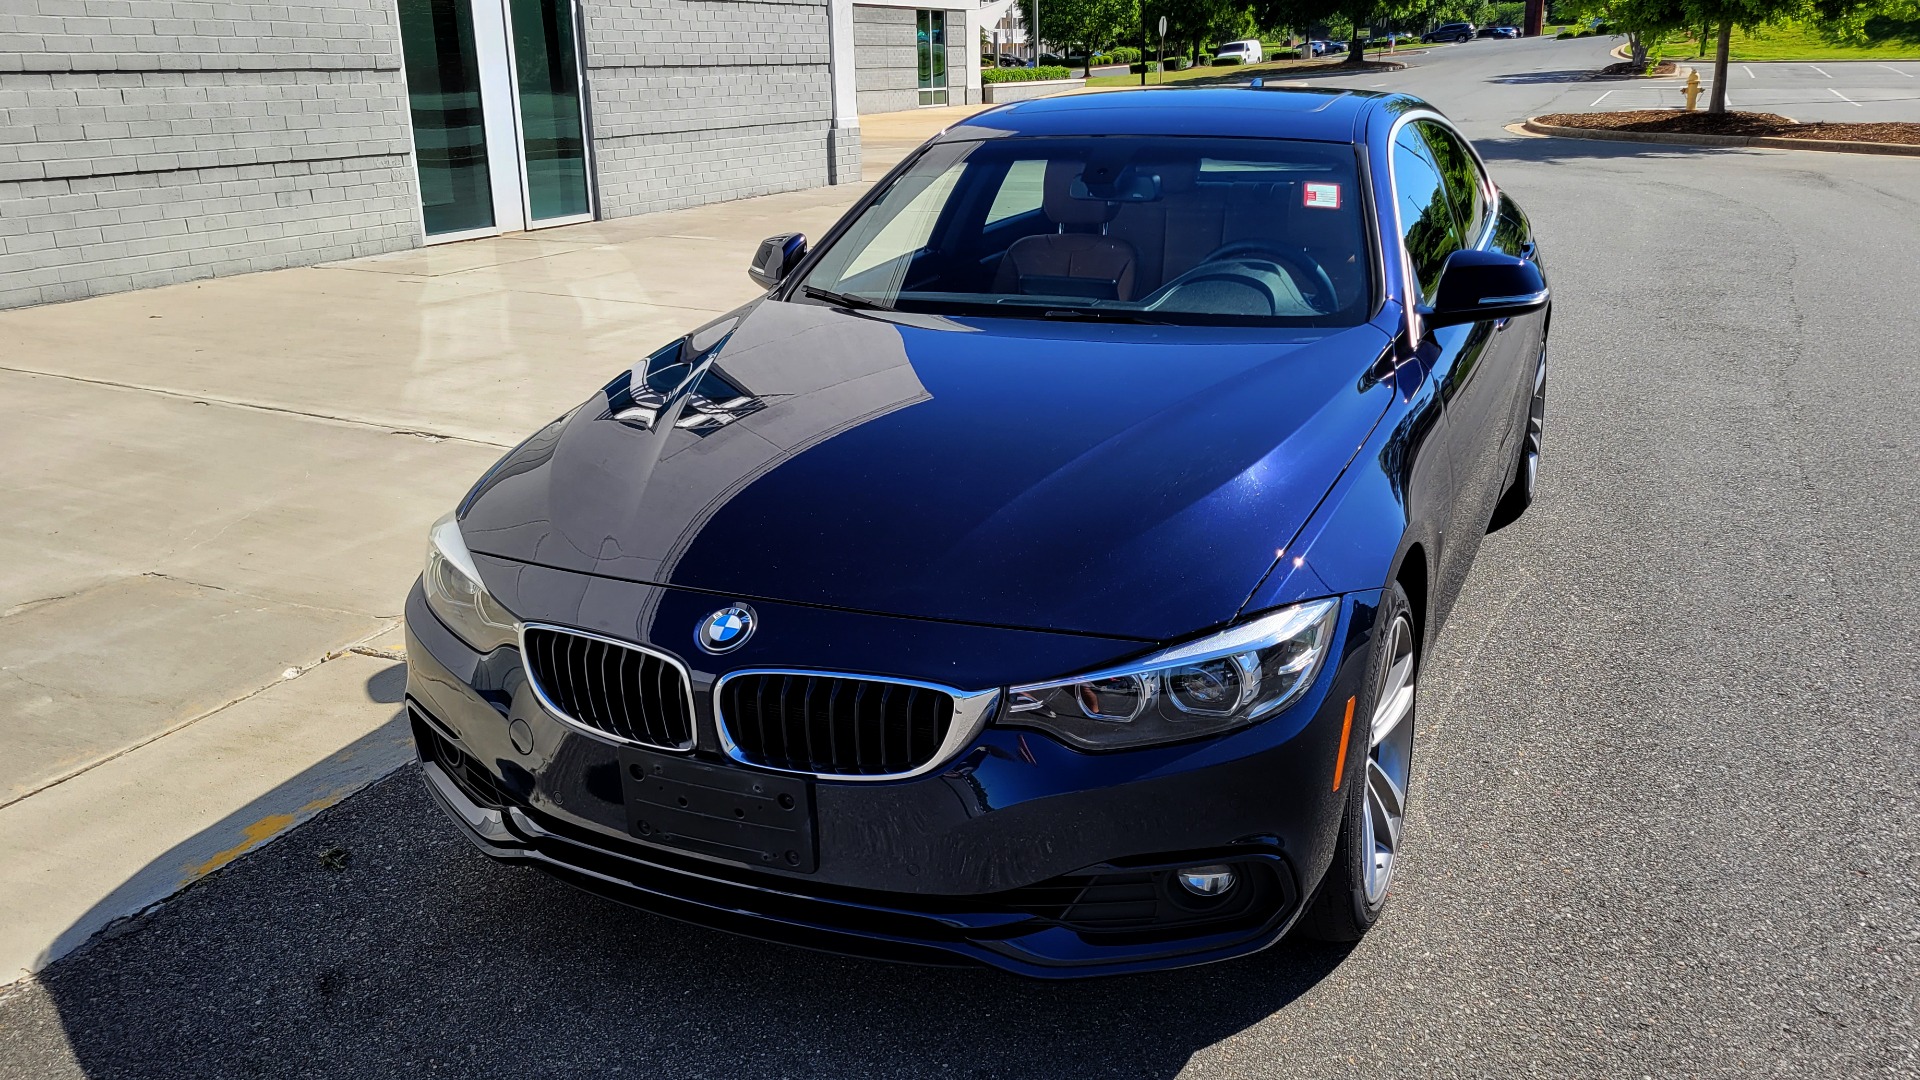 Used 2019 BMW 4 SERIES 440I XDRIVE GRAN COUPE / 3.0L / CONV PKG / HTD STS / REARVIEW for sale $39,995 at Formula Imports in Charlotte NC 28227 2